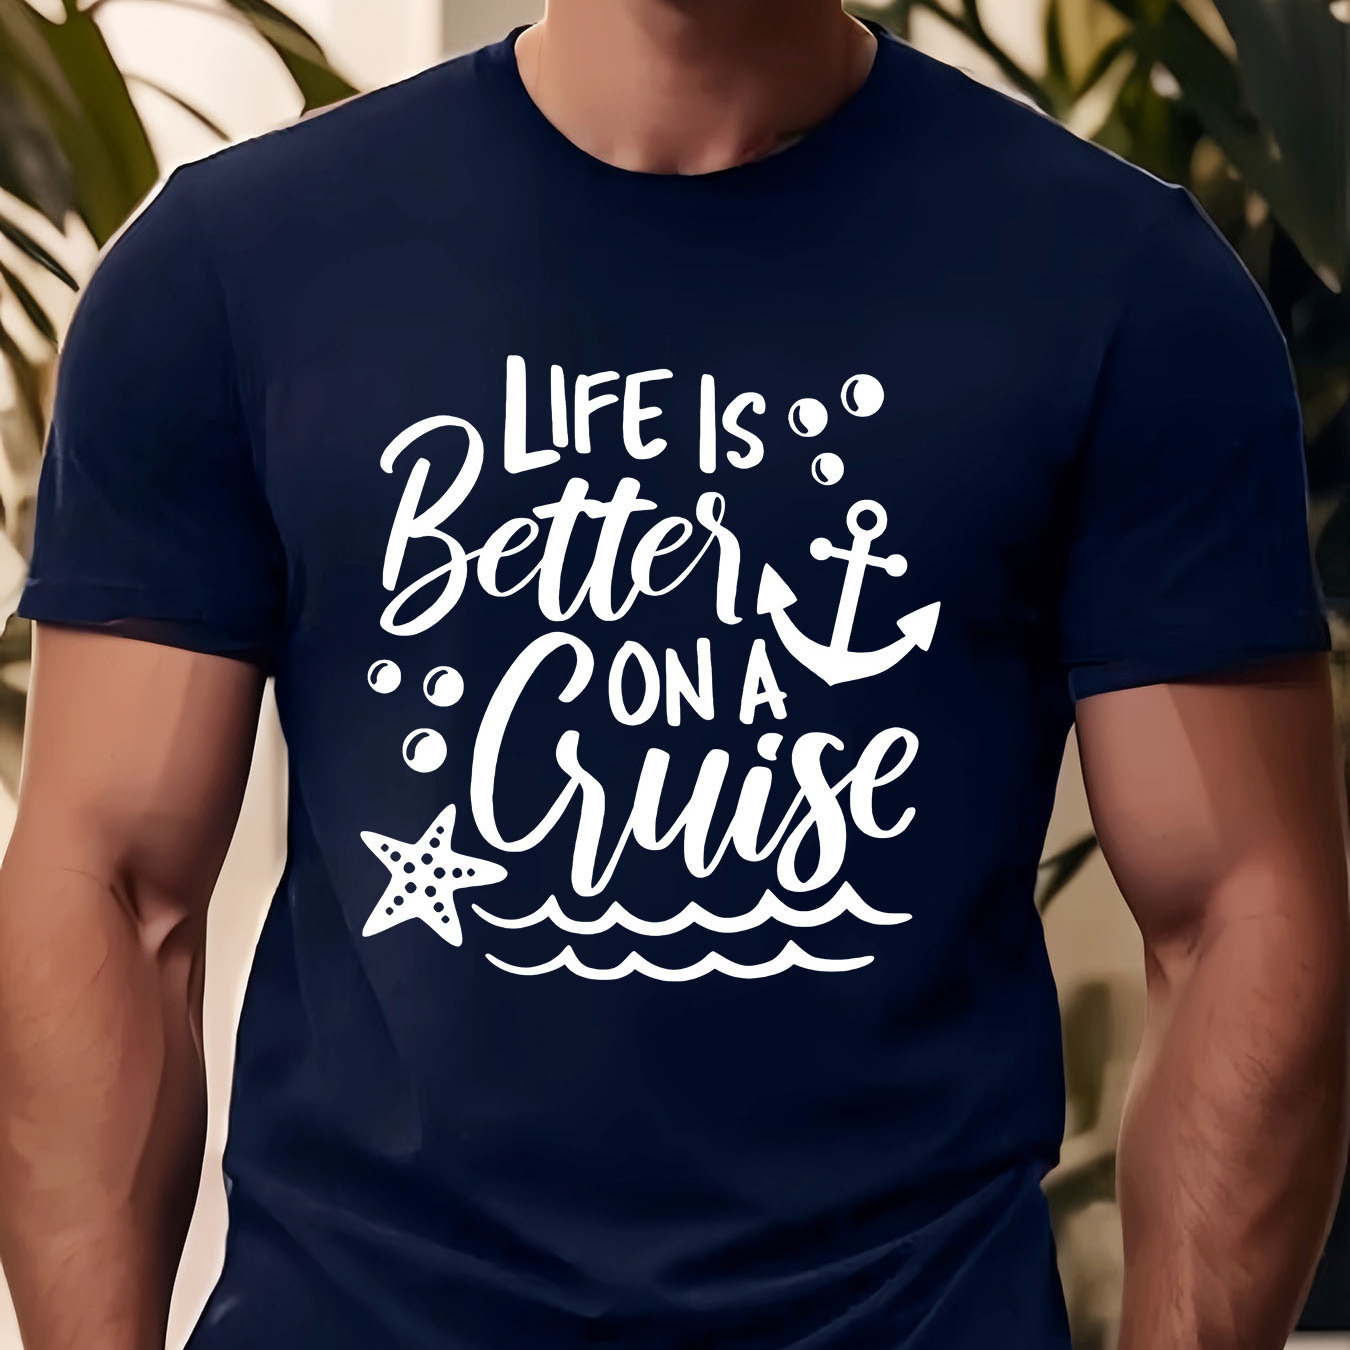 

Life Is Better On A Cruise Creative Anchor, Starfish And Bubbles Design Print, Men's Casual Round Neck Short Sleeve T-shirt, Versatile Outdoor Comfy Top For Summer